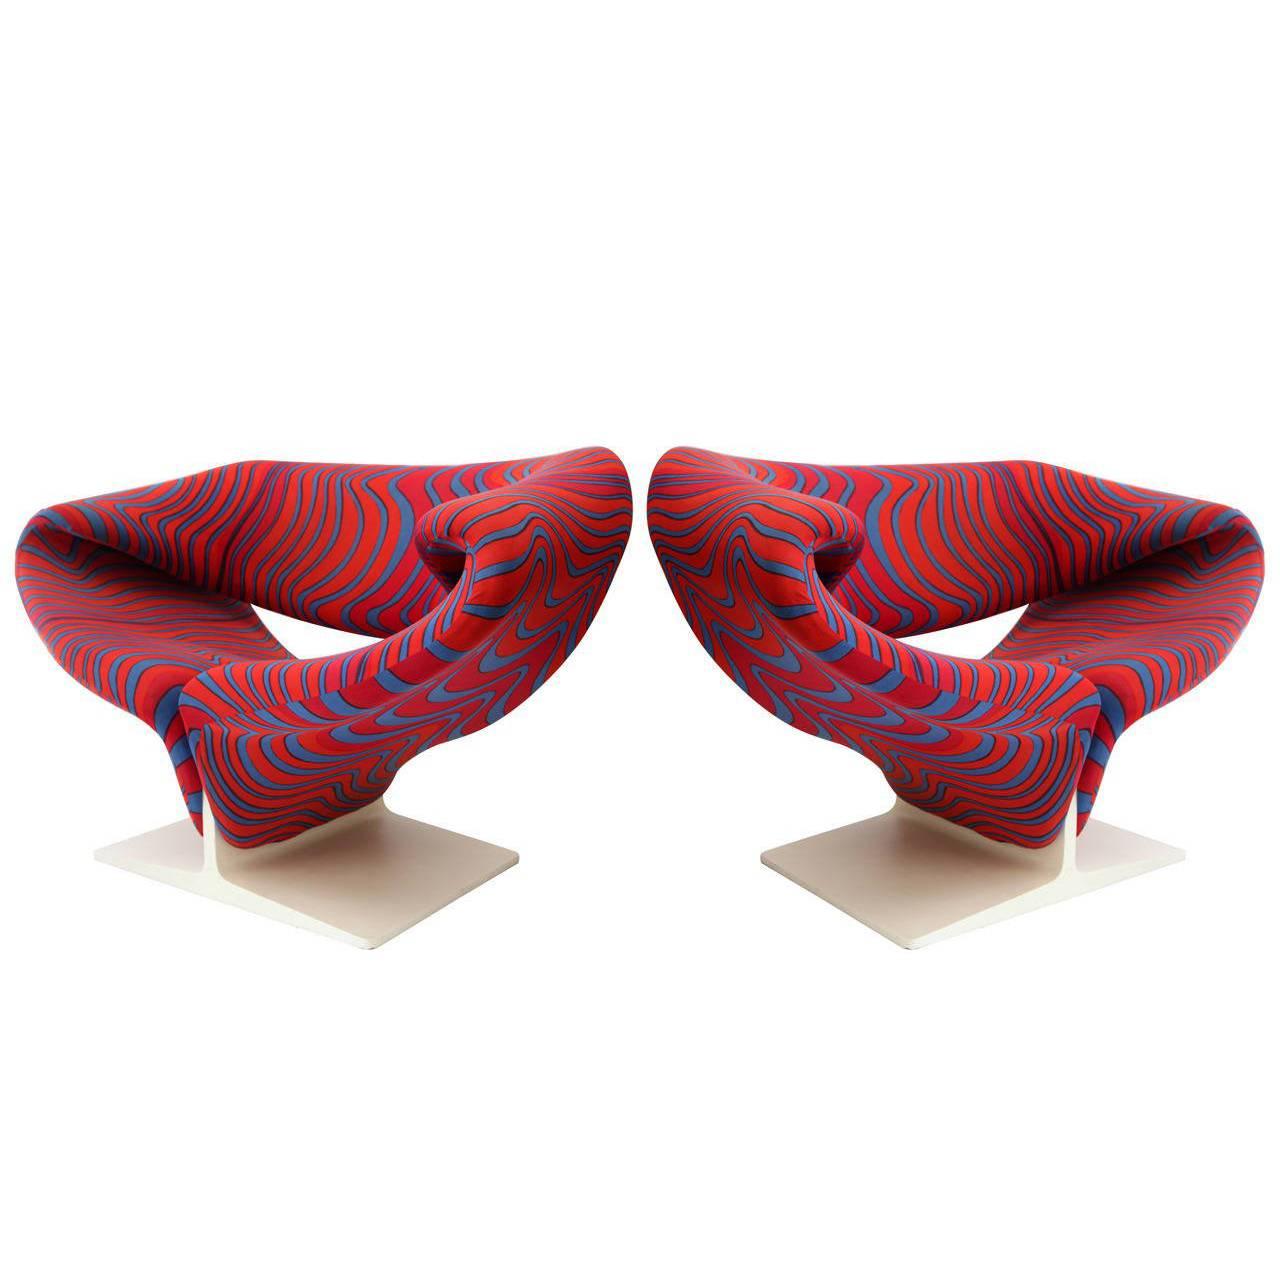 Pierre Paulin Ribbon Chairs Upholstered with Jack Lenor Larsen Fabric